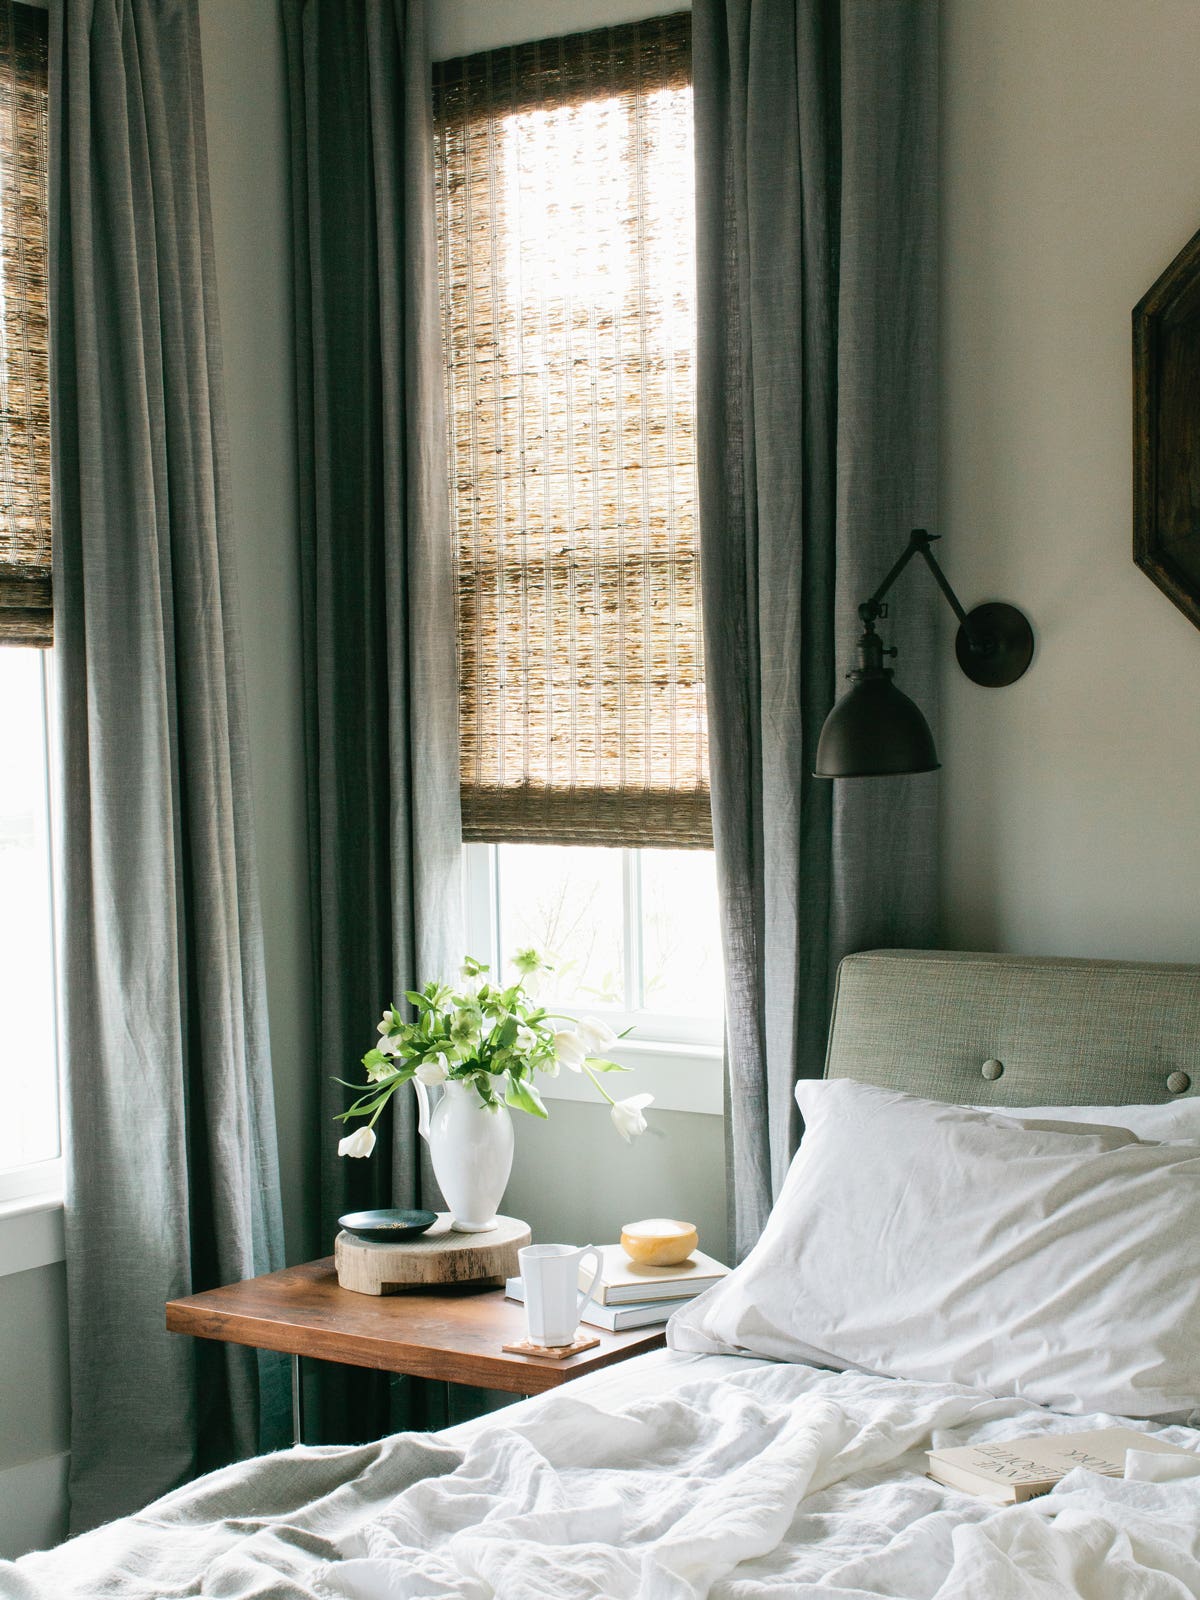 Tips for Making Your Childhood Bedroom Work as a 20-Something